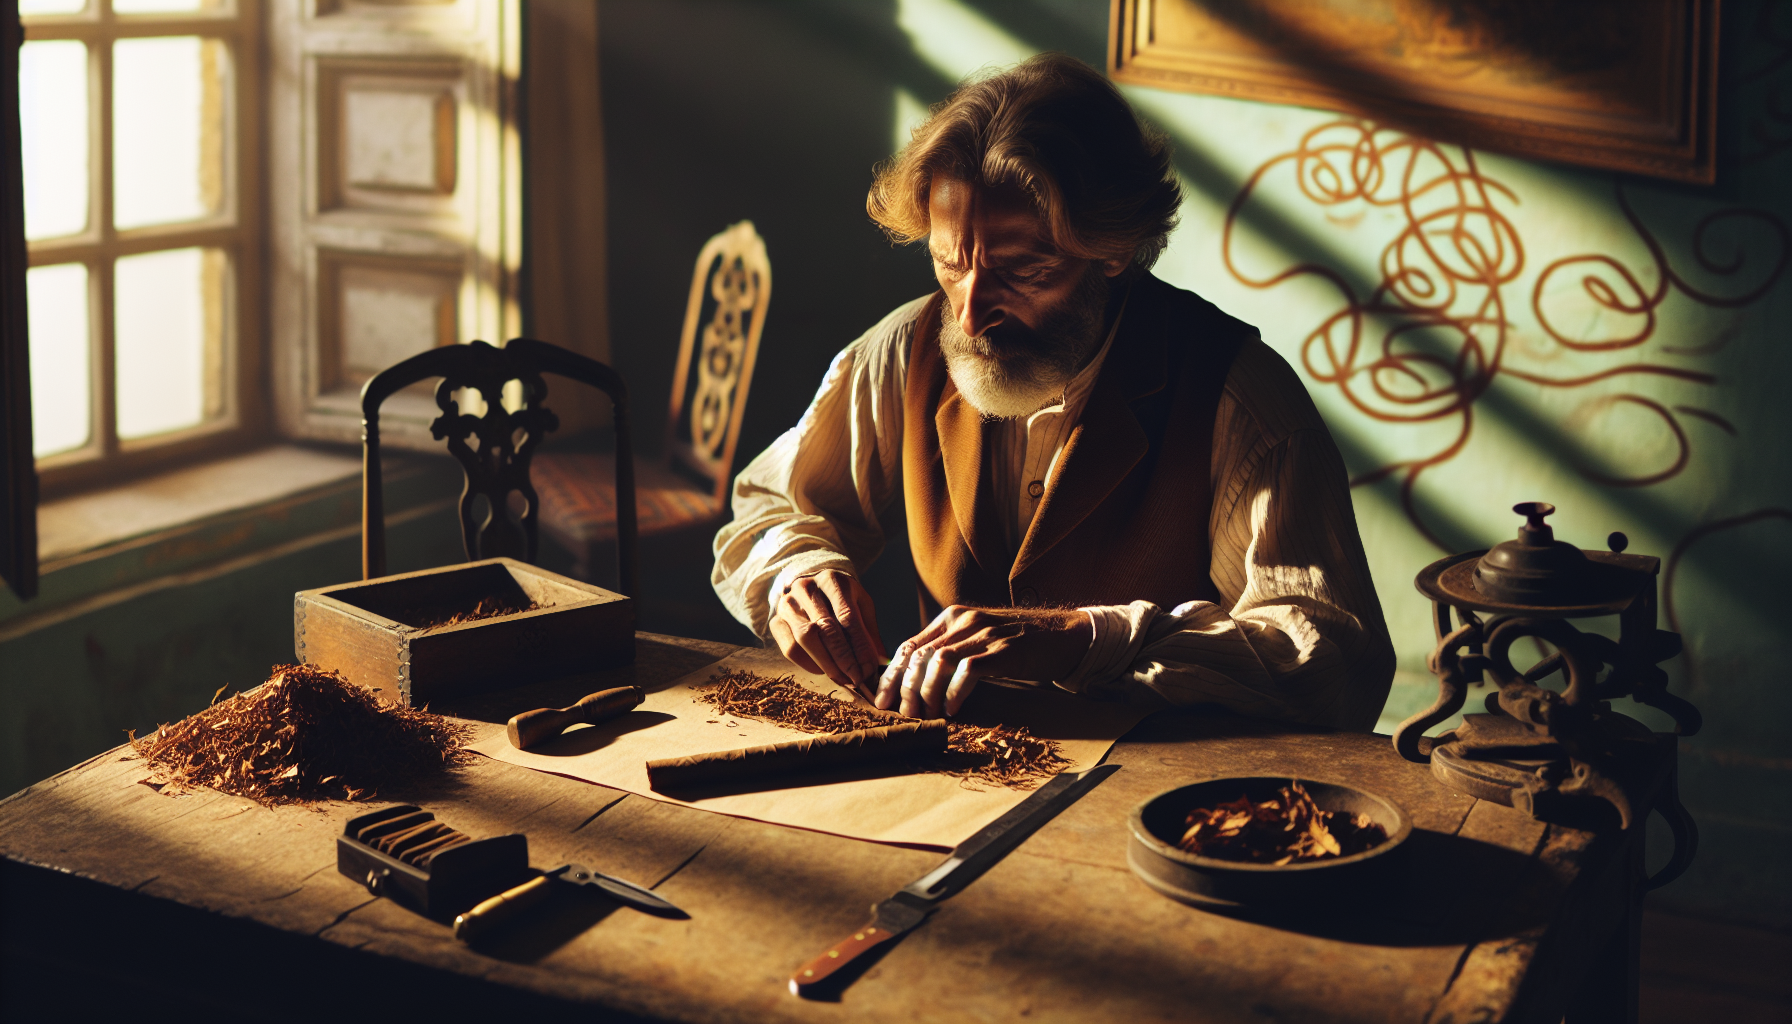 Discover the art of handmade cigars, including the hand-rolling process and boutique brands